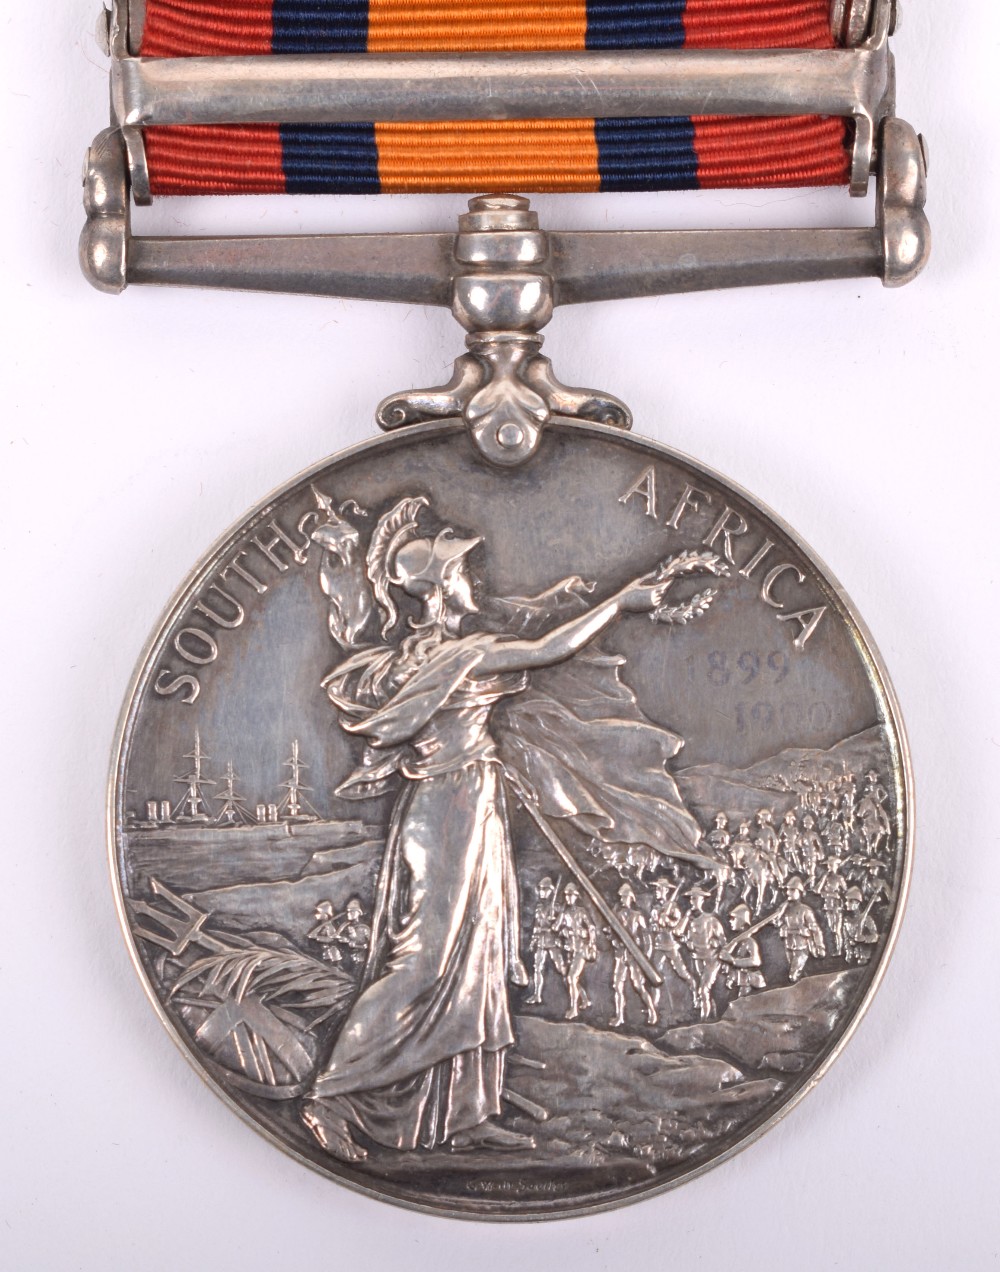 Scarce Queens South Africa Medal Defence of Ladysmith 1st Balloon Section Royal Engineers - Image 6 of 6